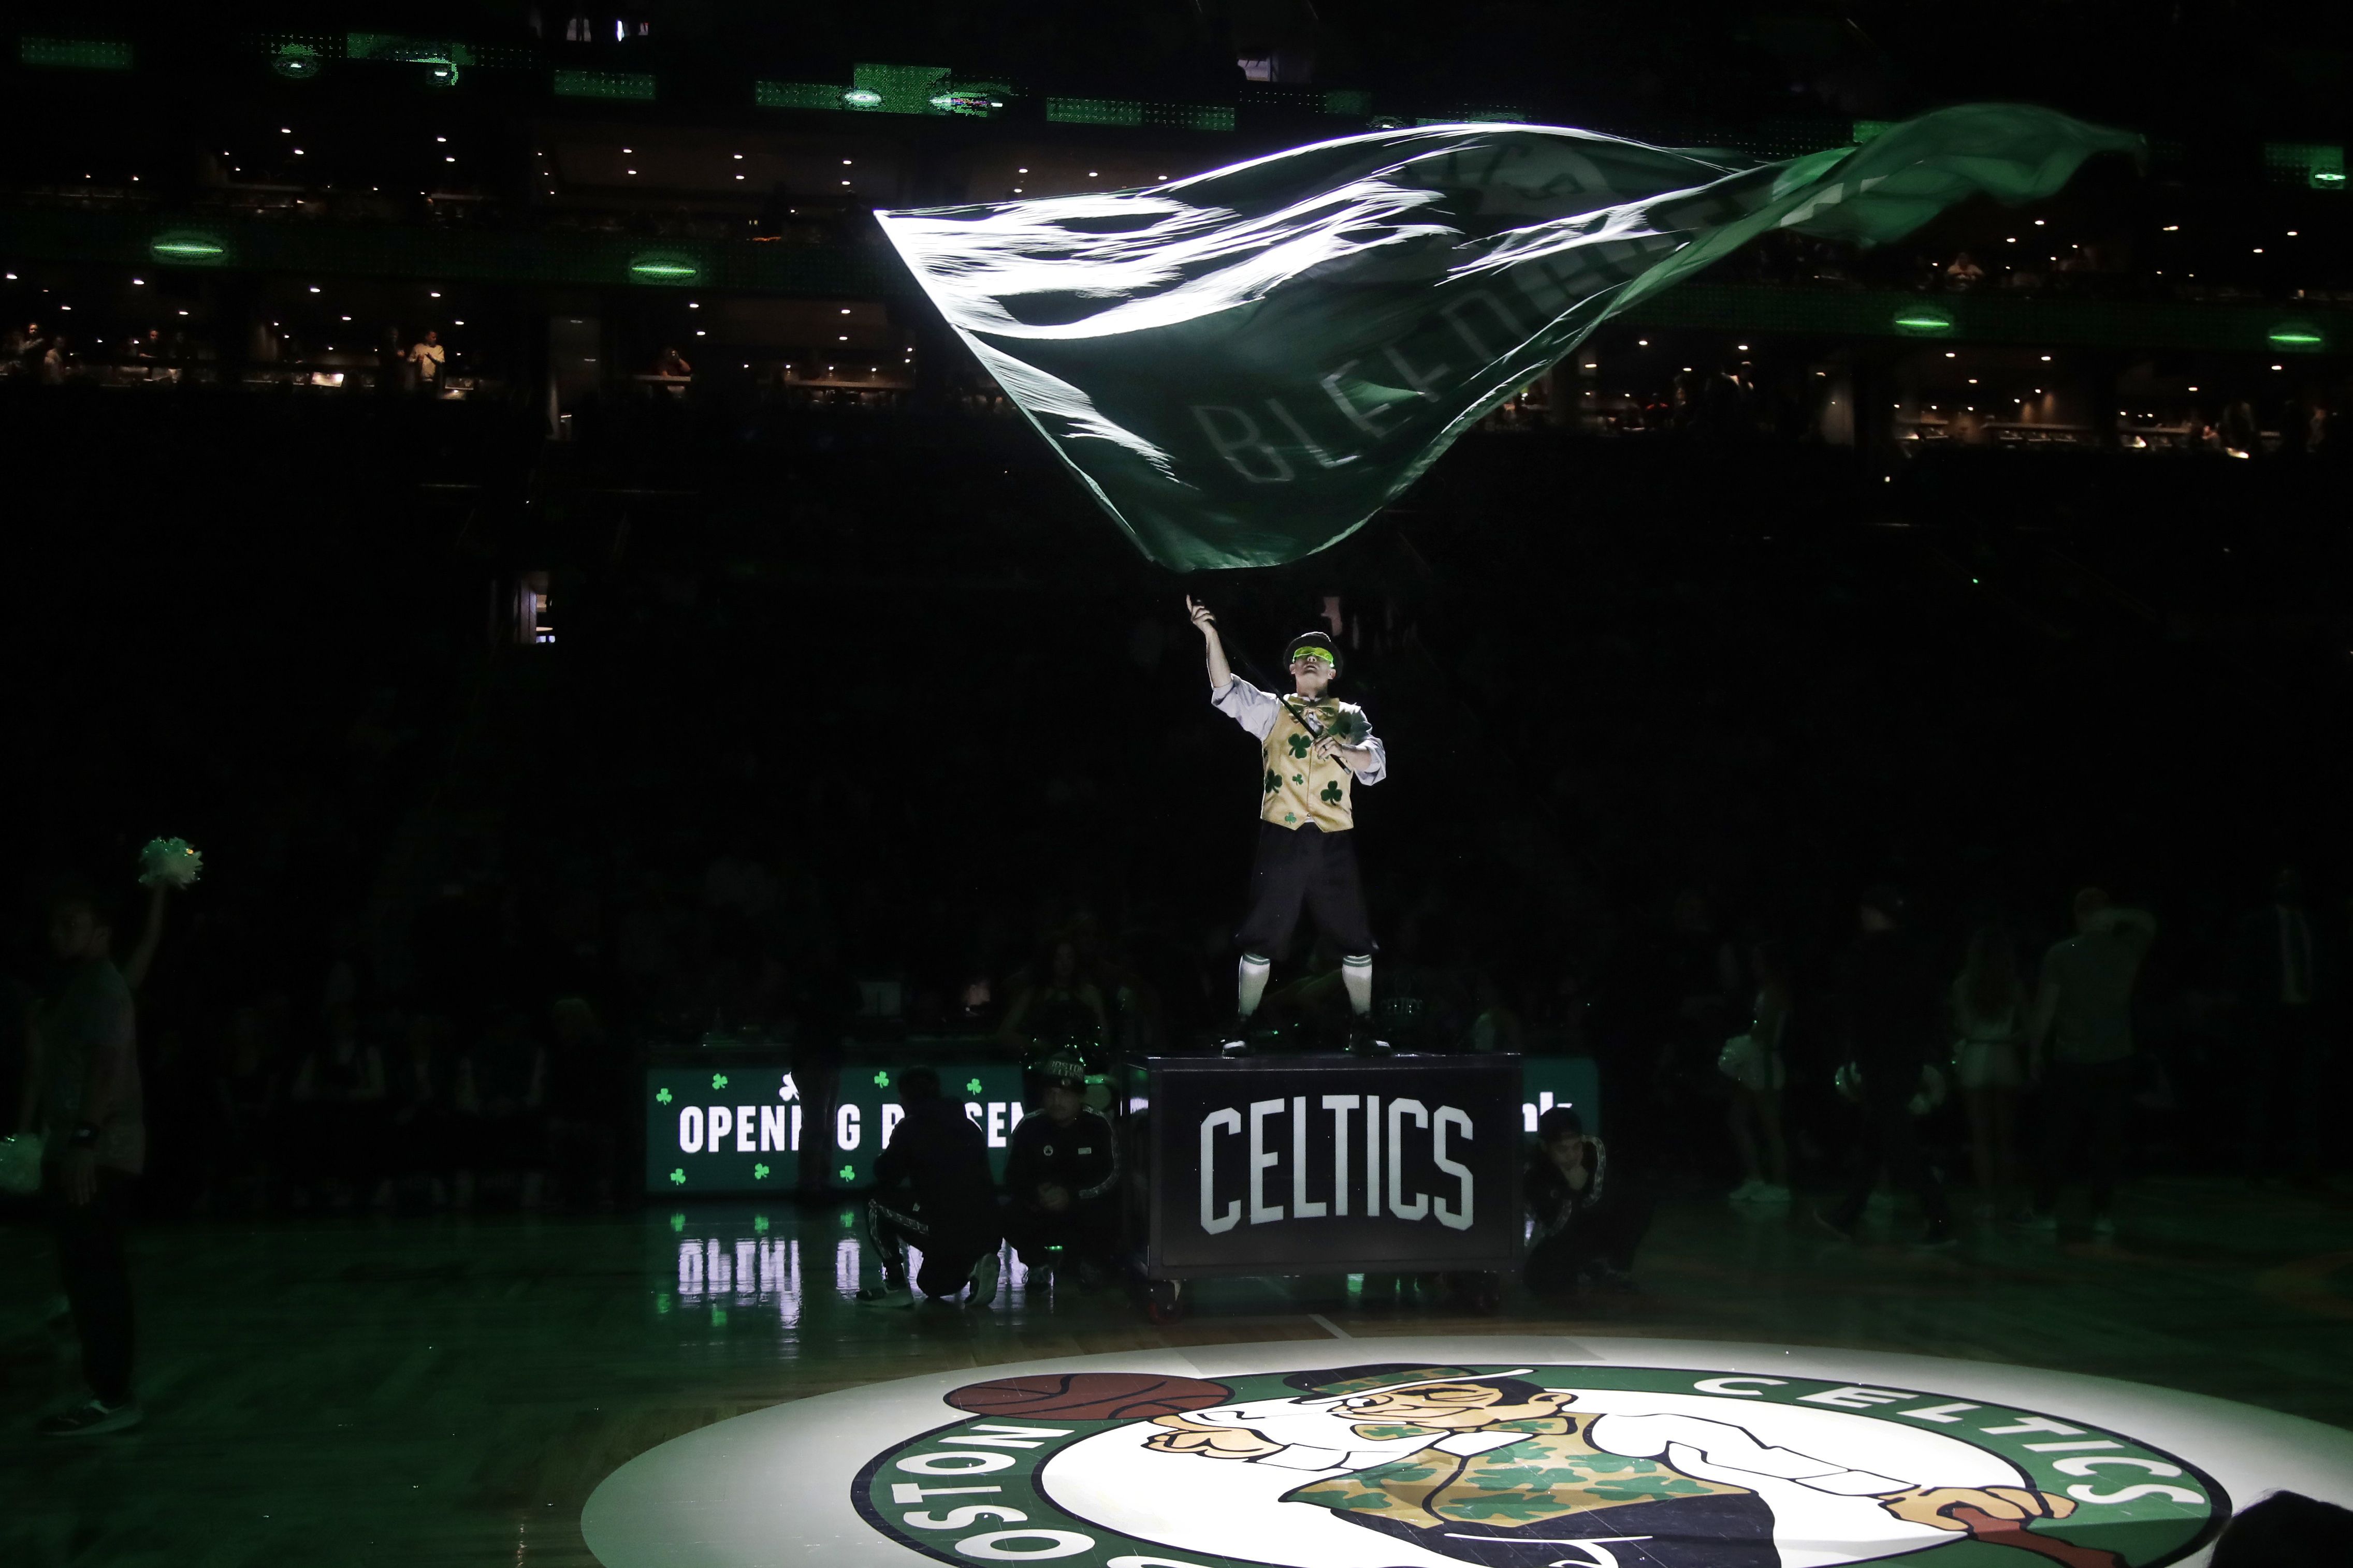 Celtics 2020 21 Schedule Dates Times And Tv Information For First Half Of Season The Boston Globe